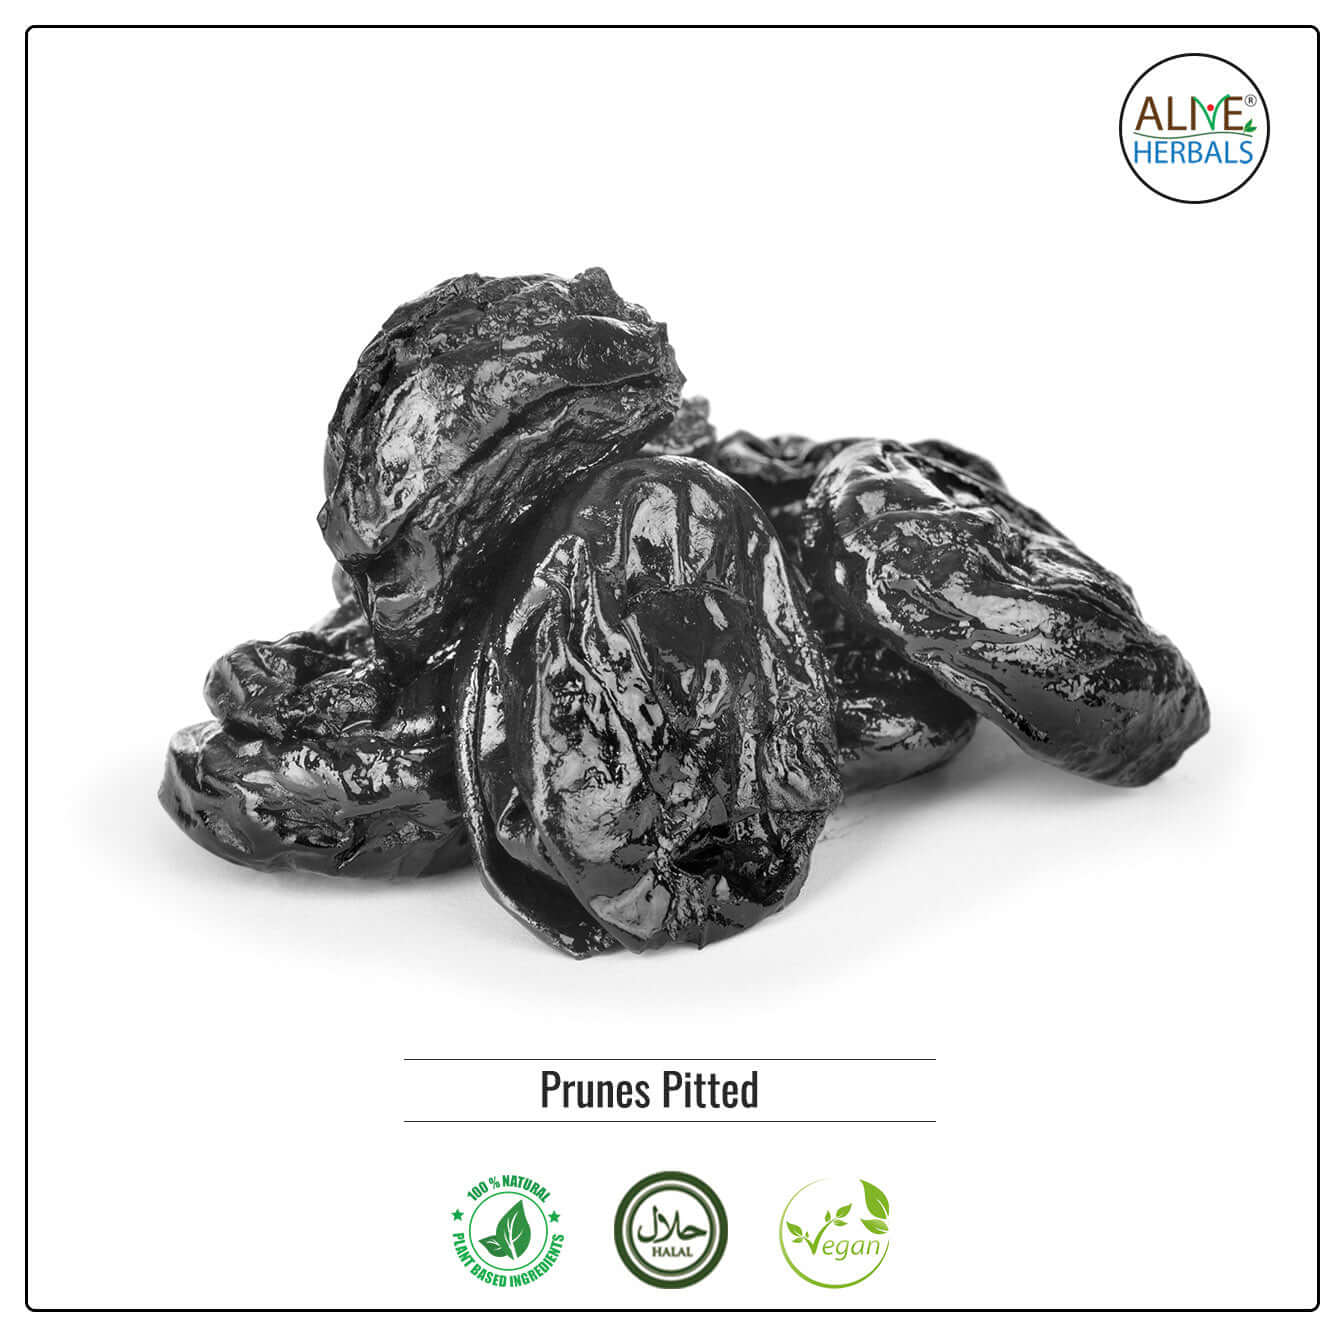 Prunes pitted - Buy at Natural Food Store | Alive Herbals.